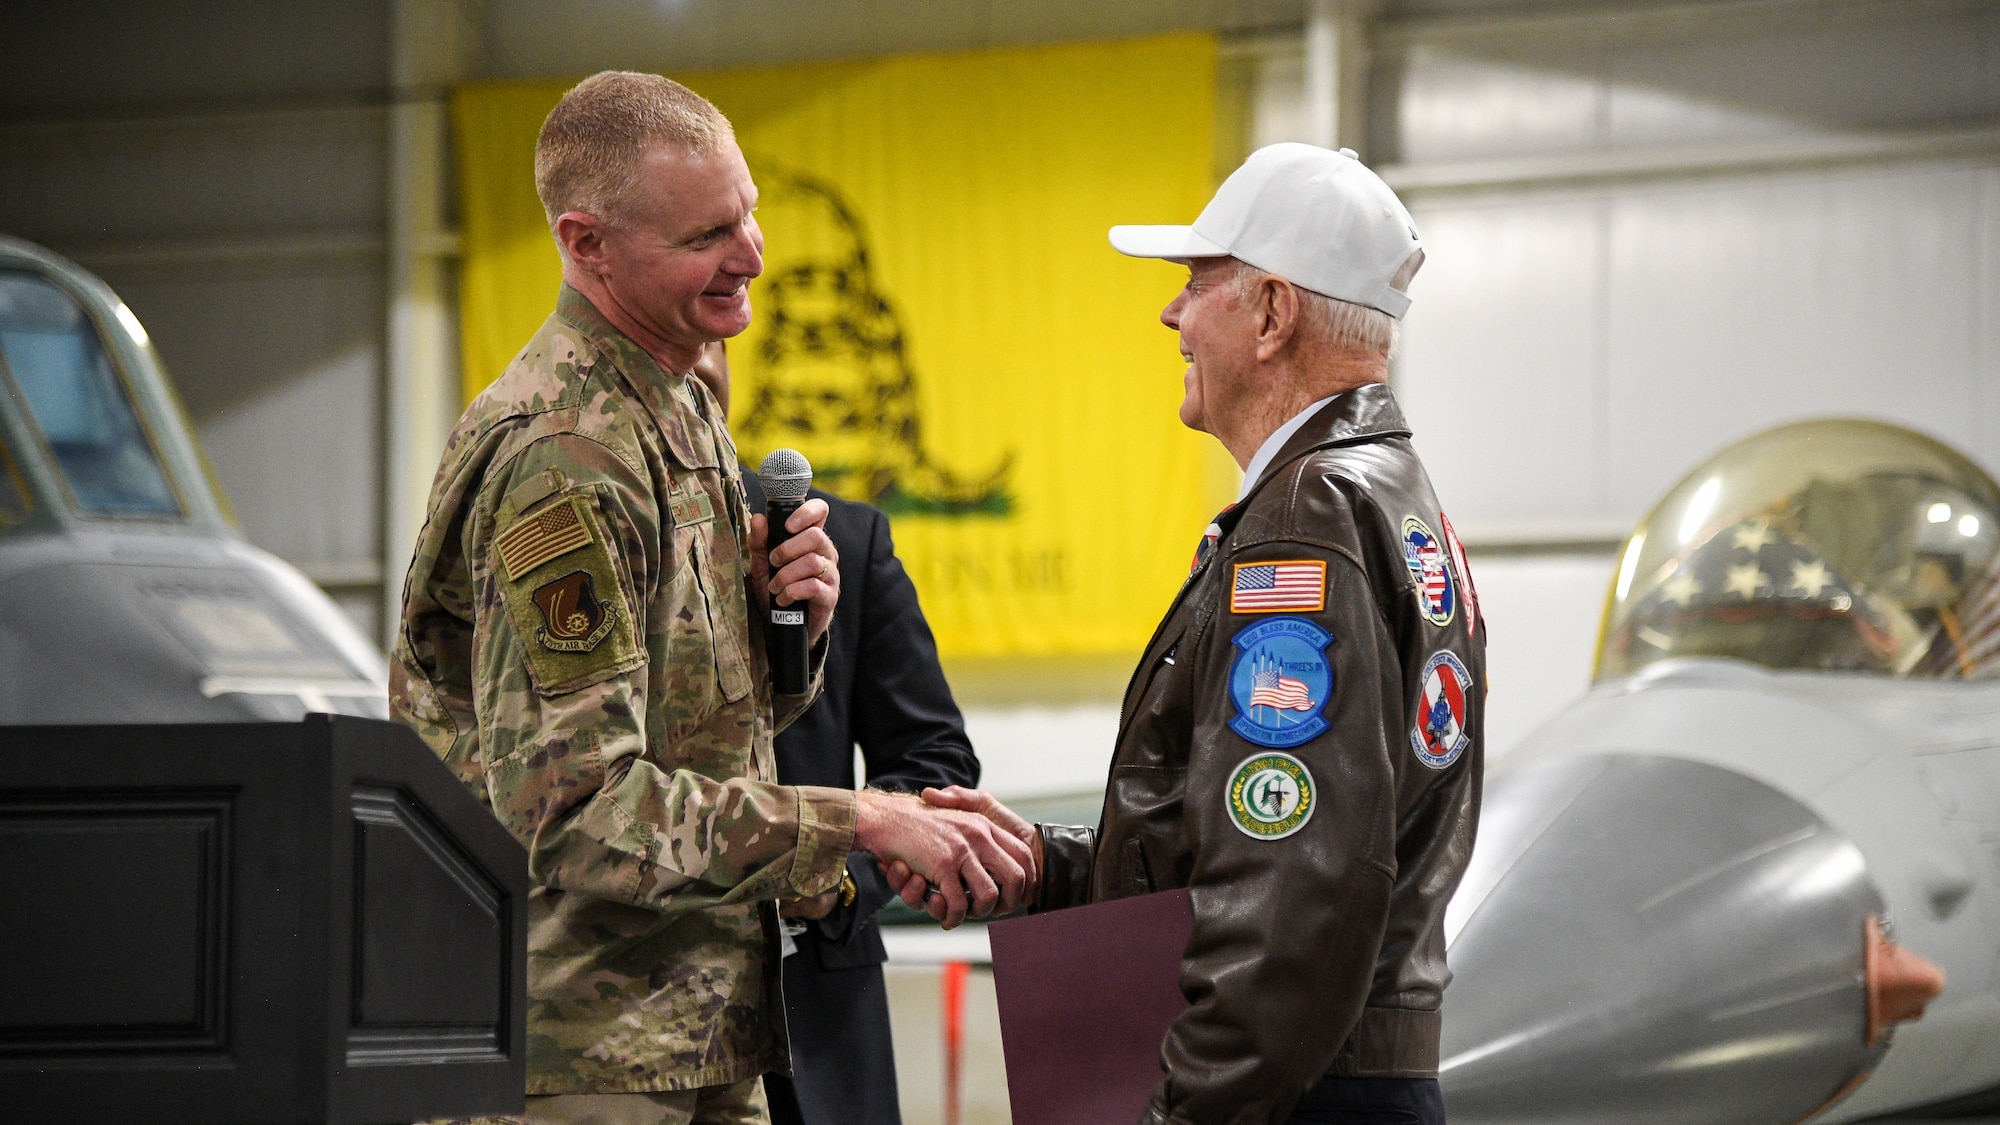 Col. Jon Eberlan at left shakes hands with retired Air Force Lt. Col. Jay Hess. Images of aircraft in the museum appear int he background.